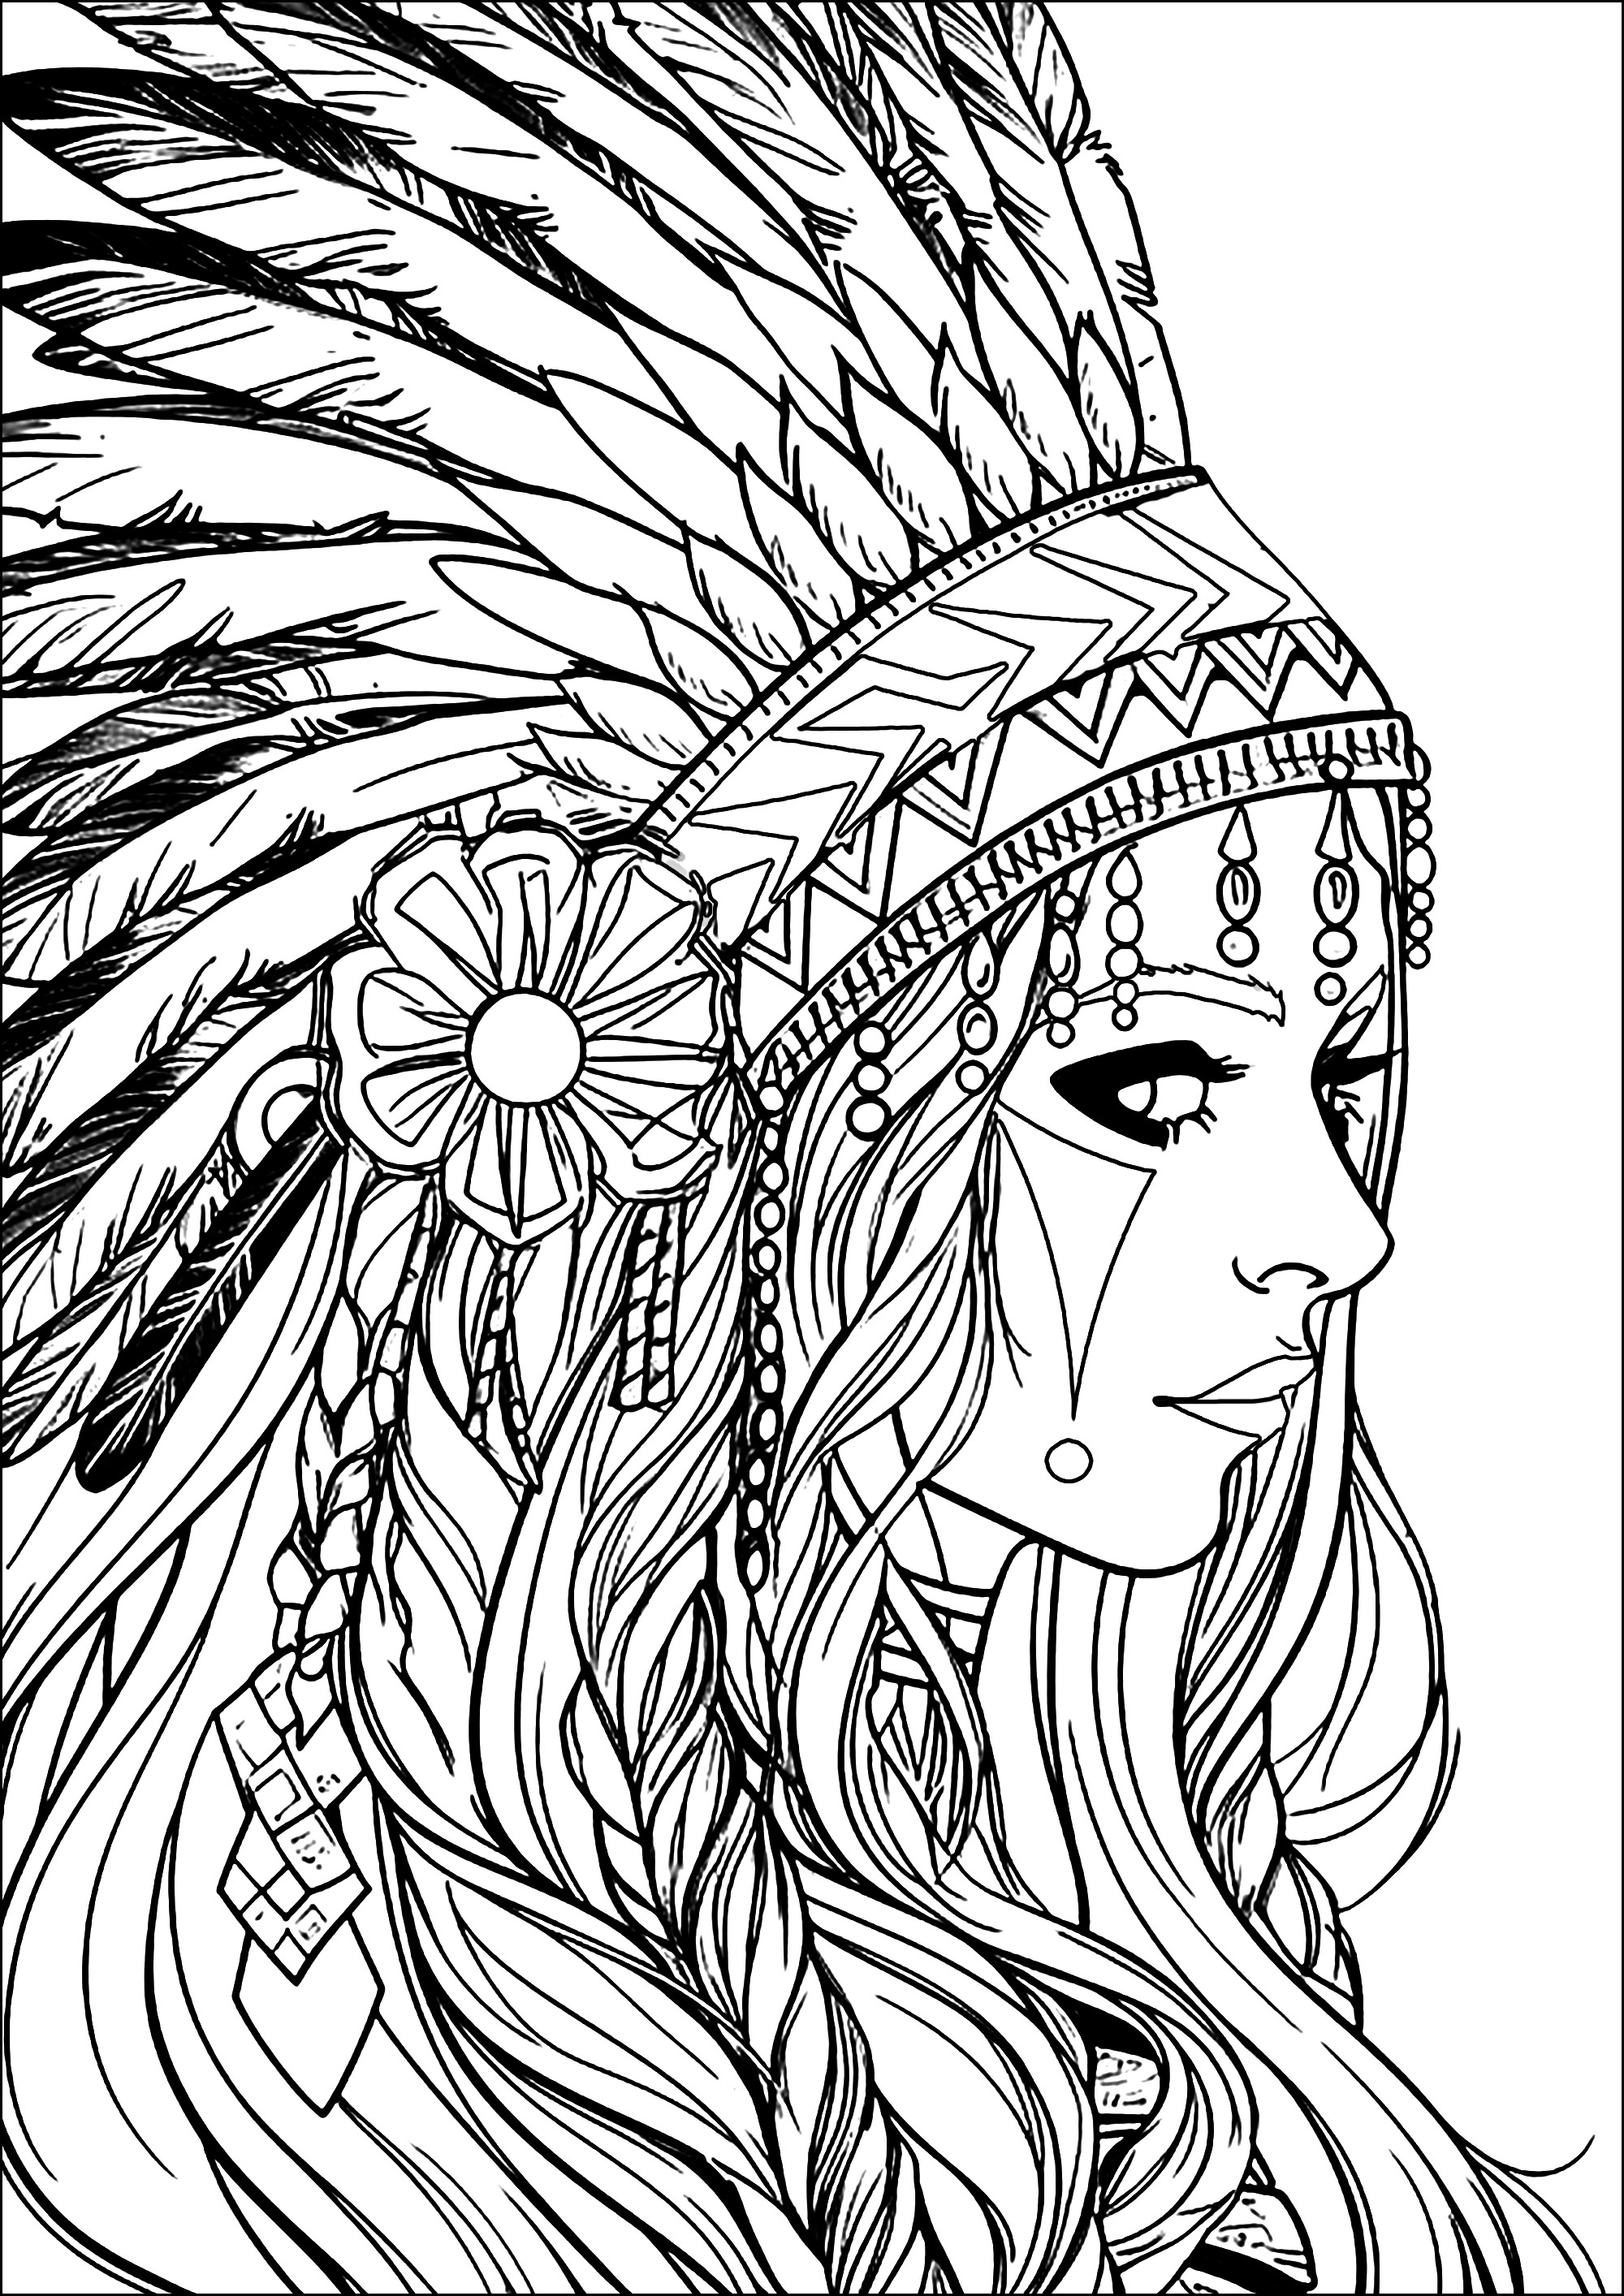 Black Women Portraits Coloring Book For Adults: Black Beauty Images Coloring  Books For Women, Adult Coloring Books For Women, Black Magic Coloring   Books, Black Girl Coloring Books For Adults. by Dela